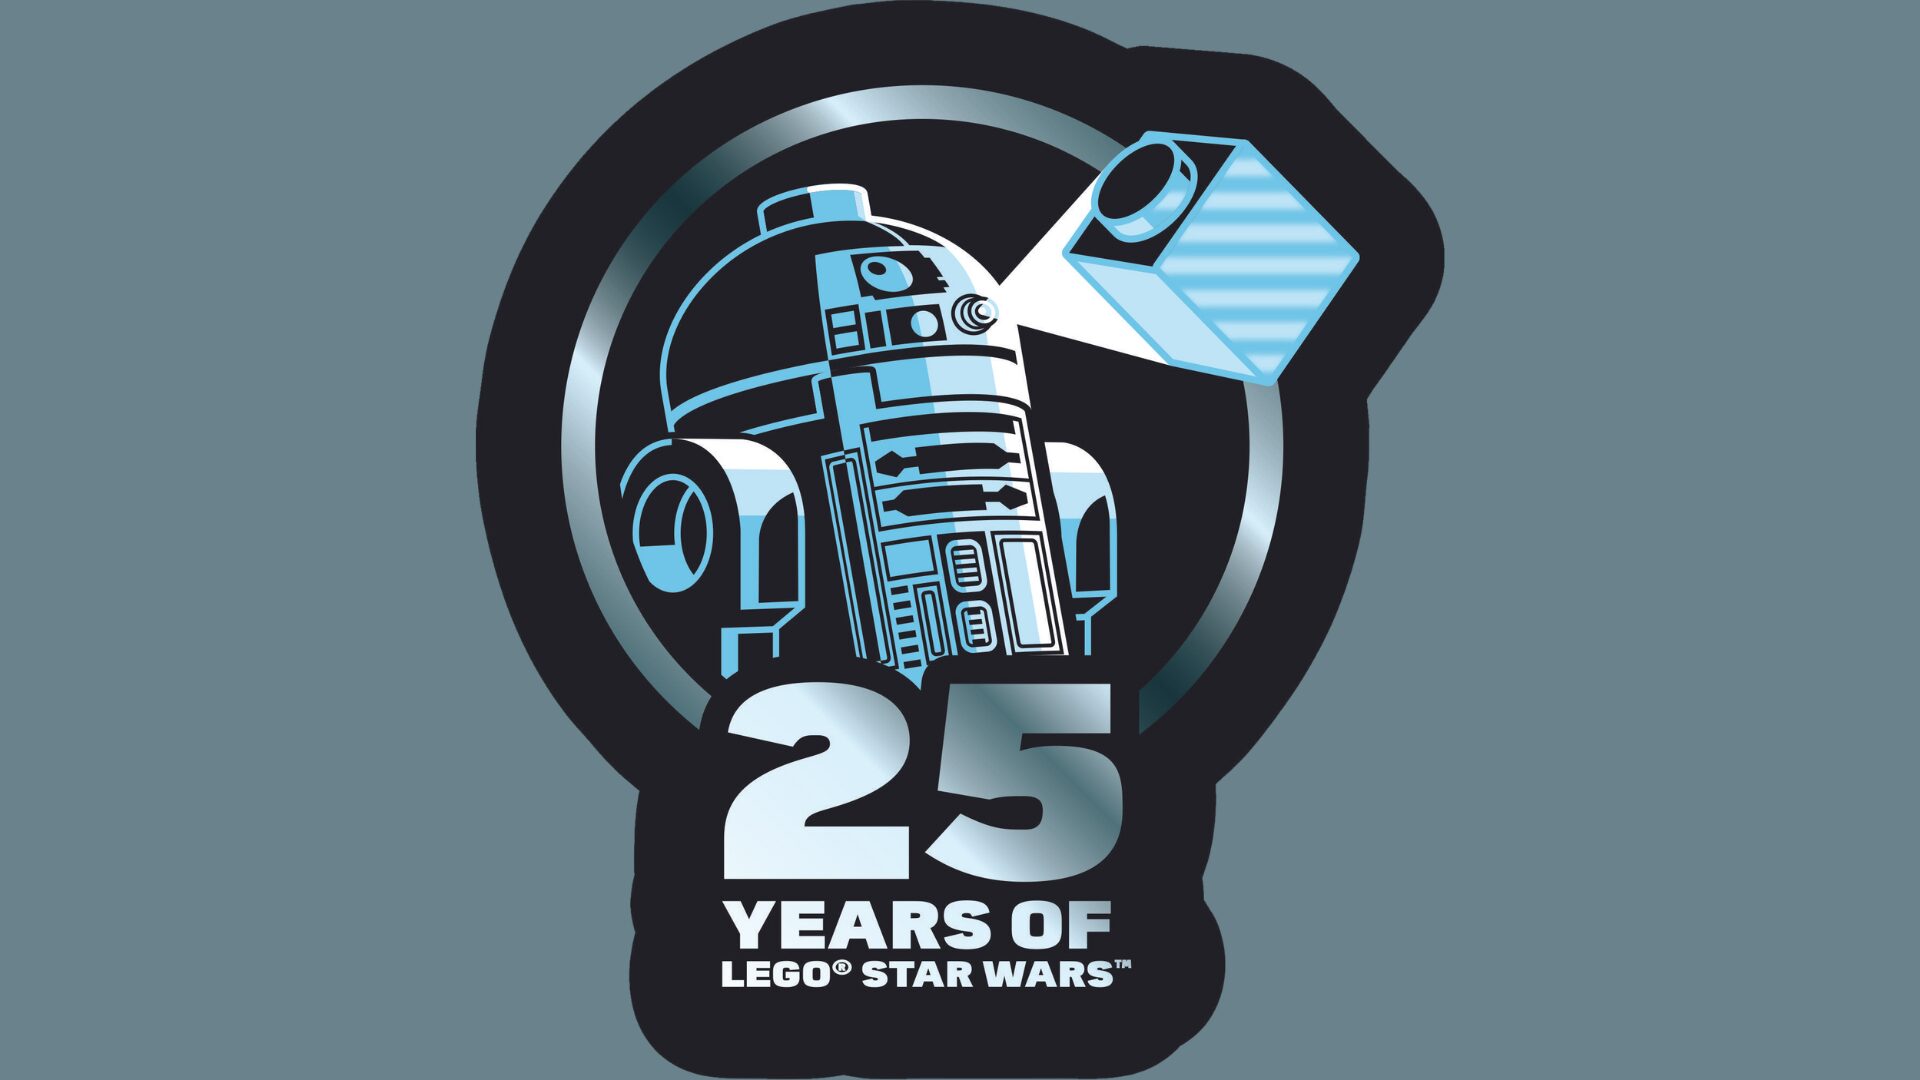 LEGO Star Wars Visual Dictionary Updated Edition Coming in 2024 - The Brick  Fan